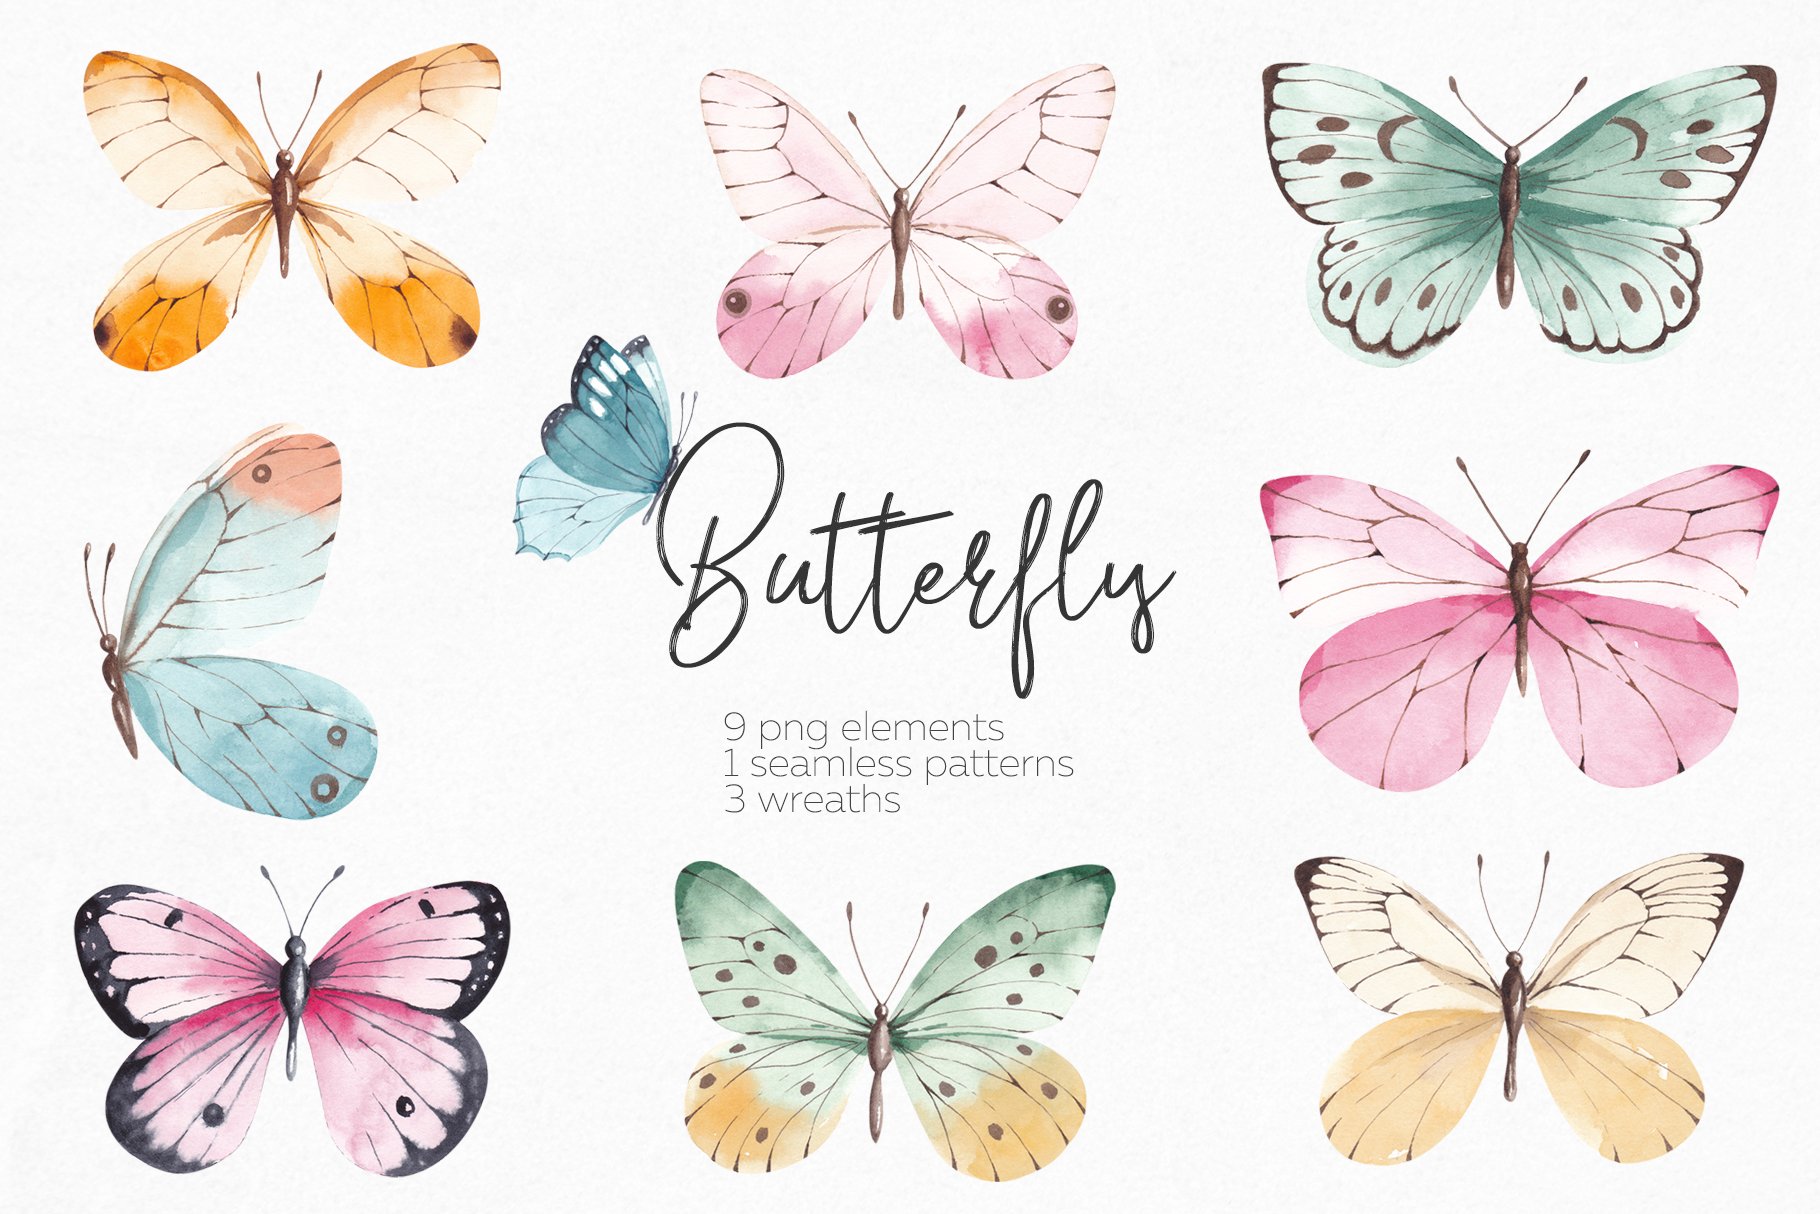 Watercolor Butterfly Set cover image.